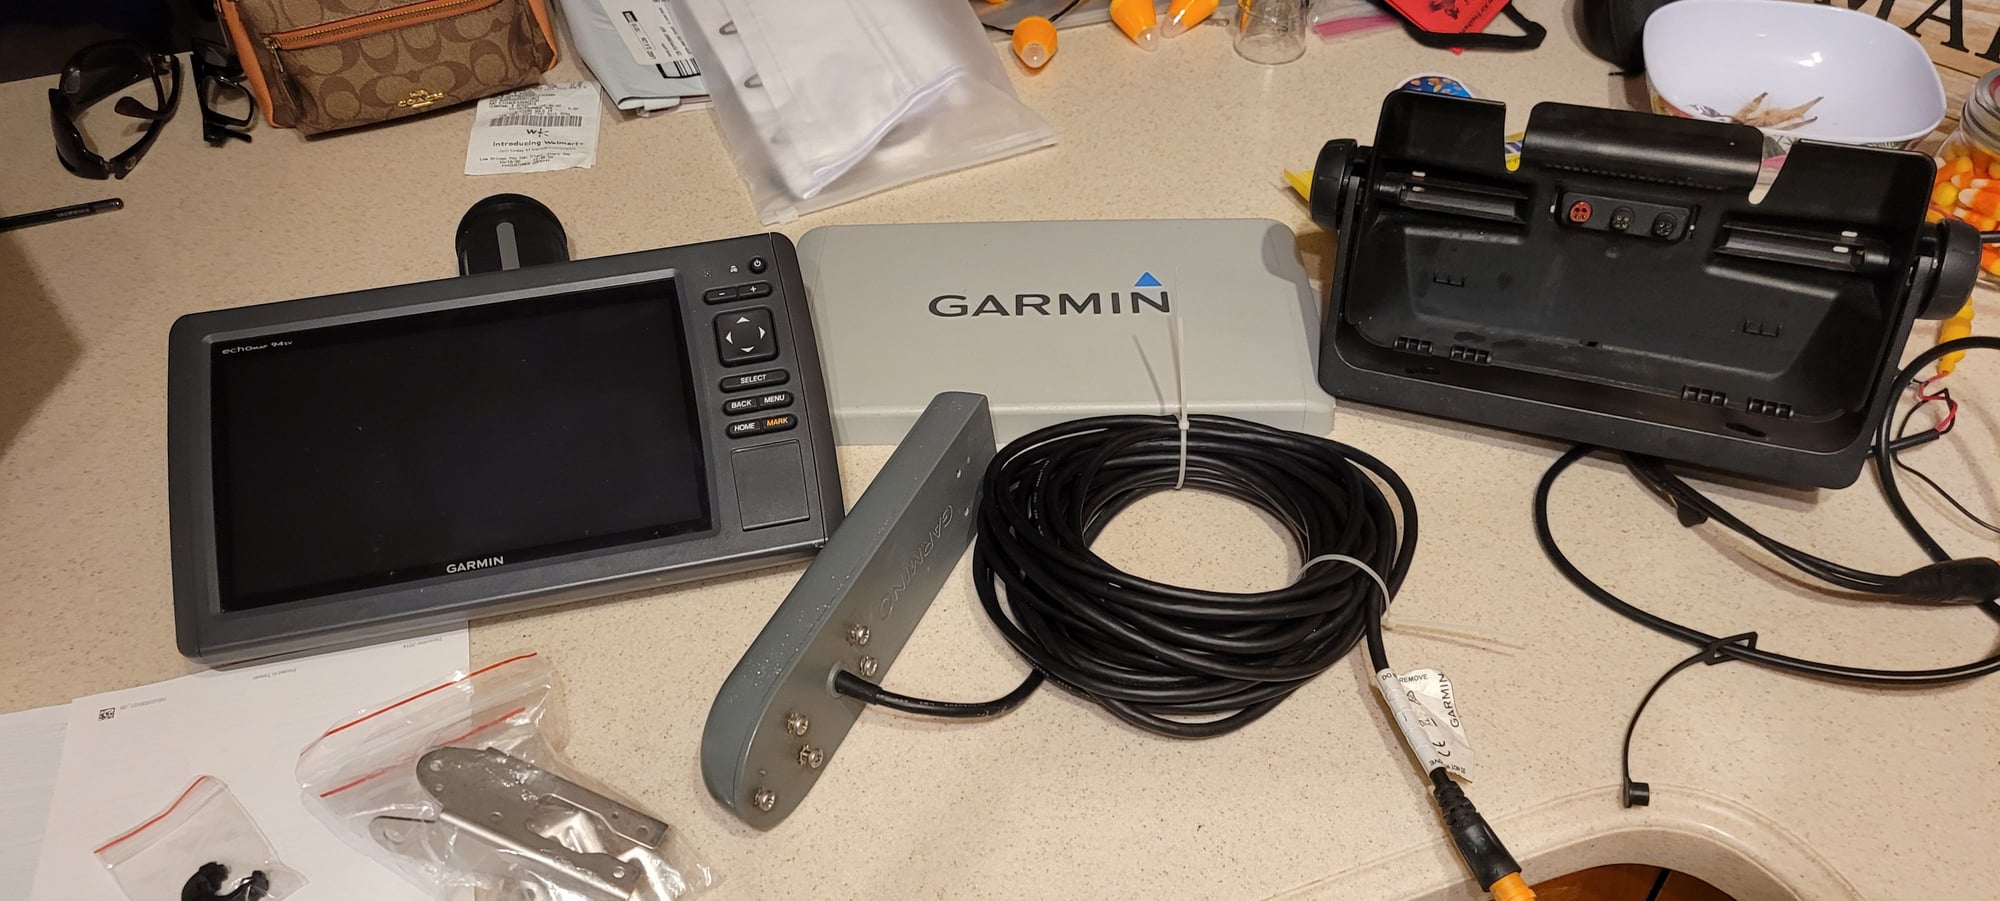 garmin-94sv-and-74dv-the-hull-truth-boating-and-fishing-forum